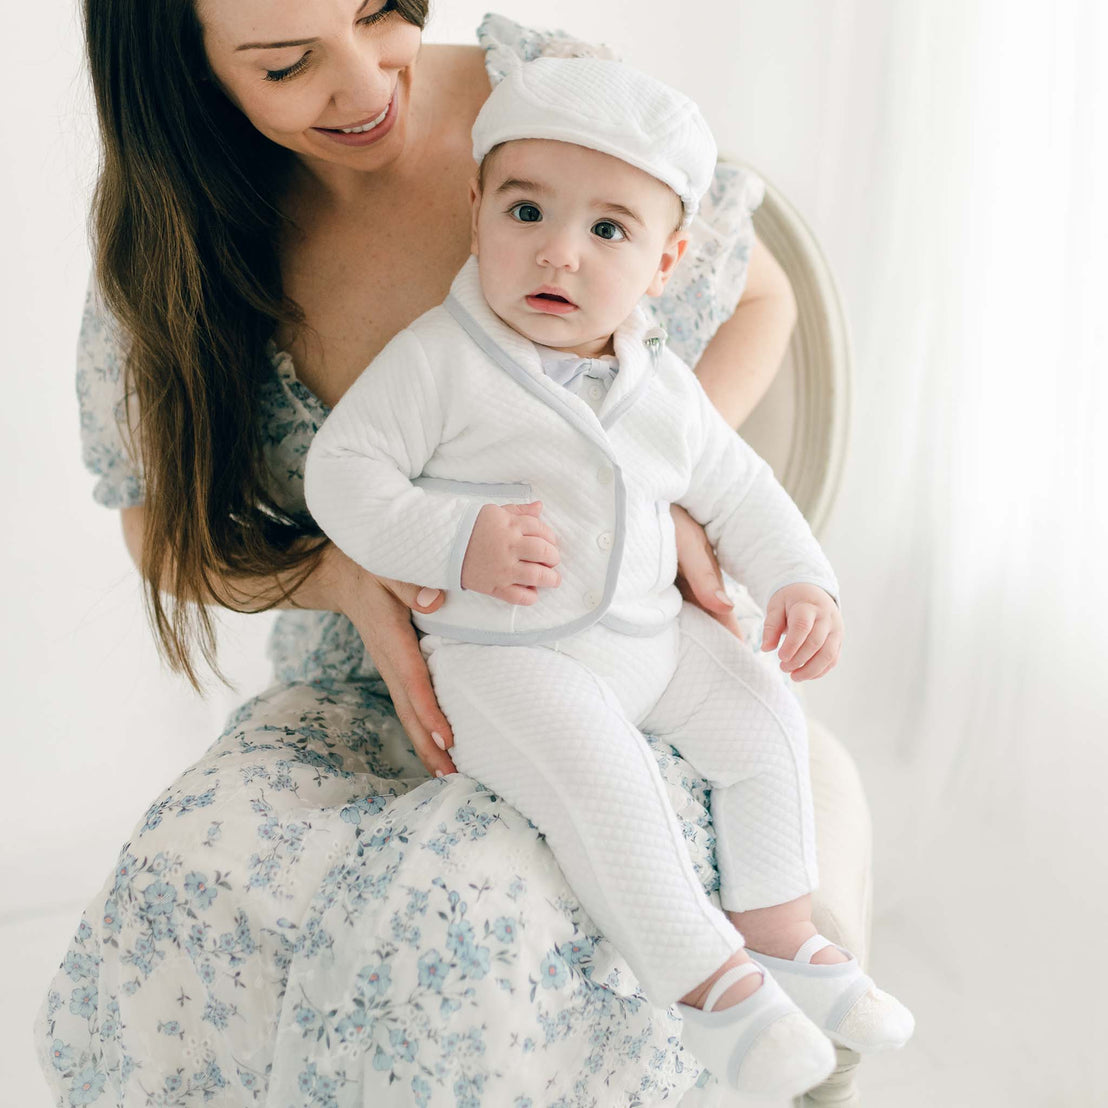 A smiling woman in a floral dress holds a baby dressed in a Harrison 3-Piece Pants Suit, sitting in a bright, airy room. The baby, wearing a white hat, looks curiously at the camera.